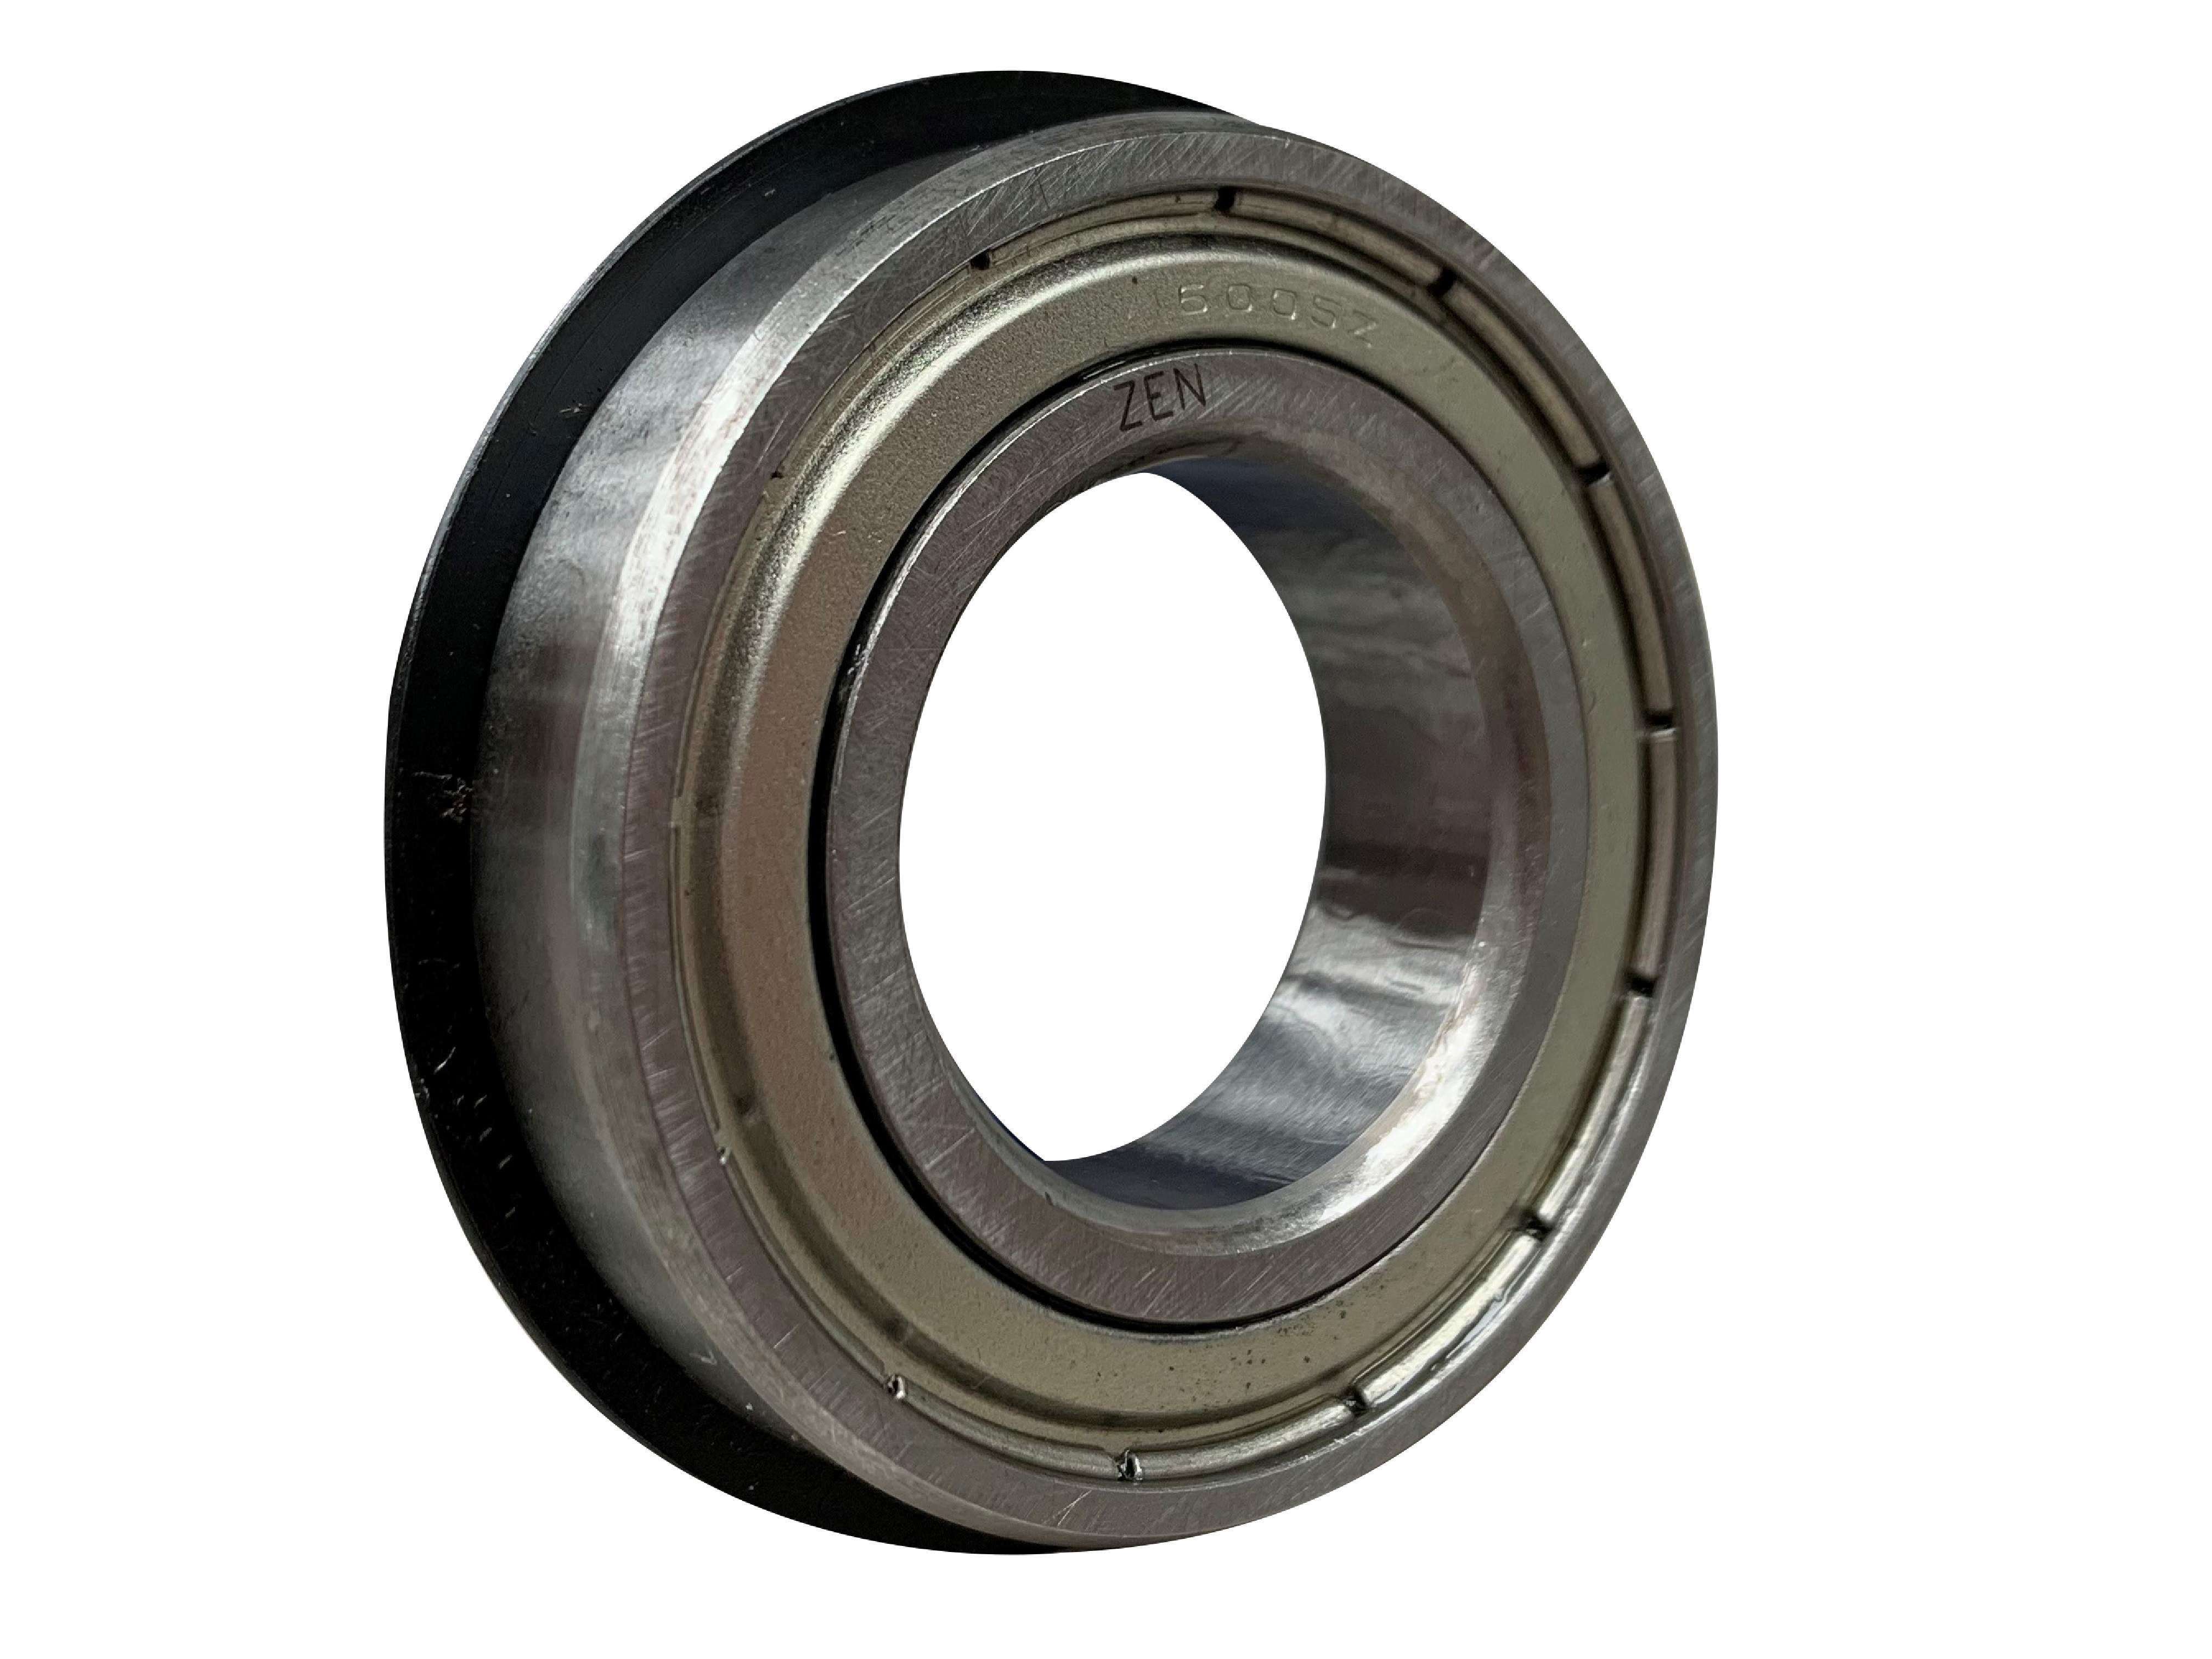 ZEN 6204-2Z-NR Shielded Ball Bearing With Snap Ring 20mm x 47mm x 14mm